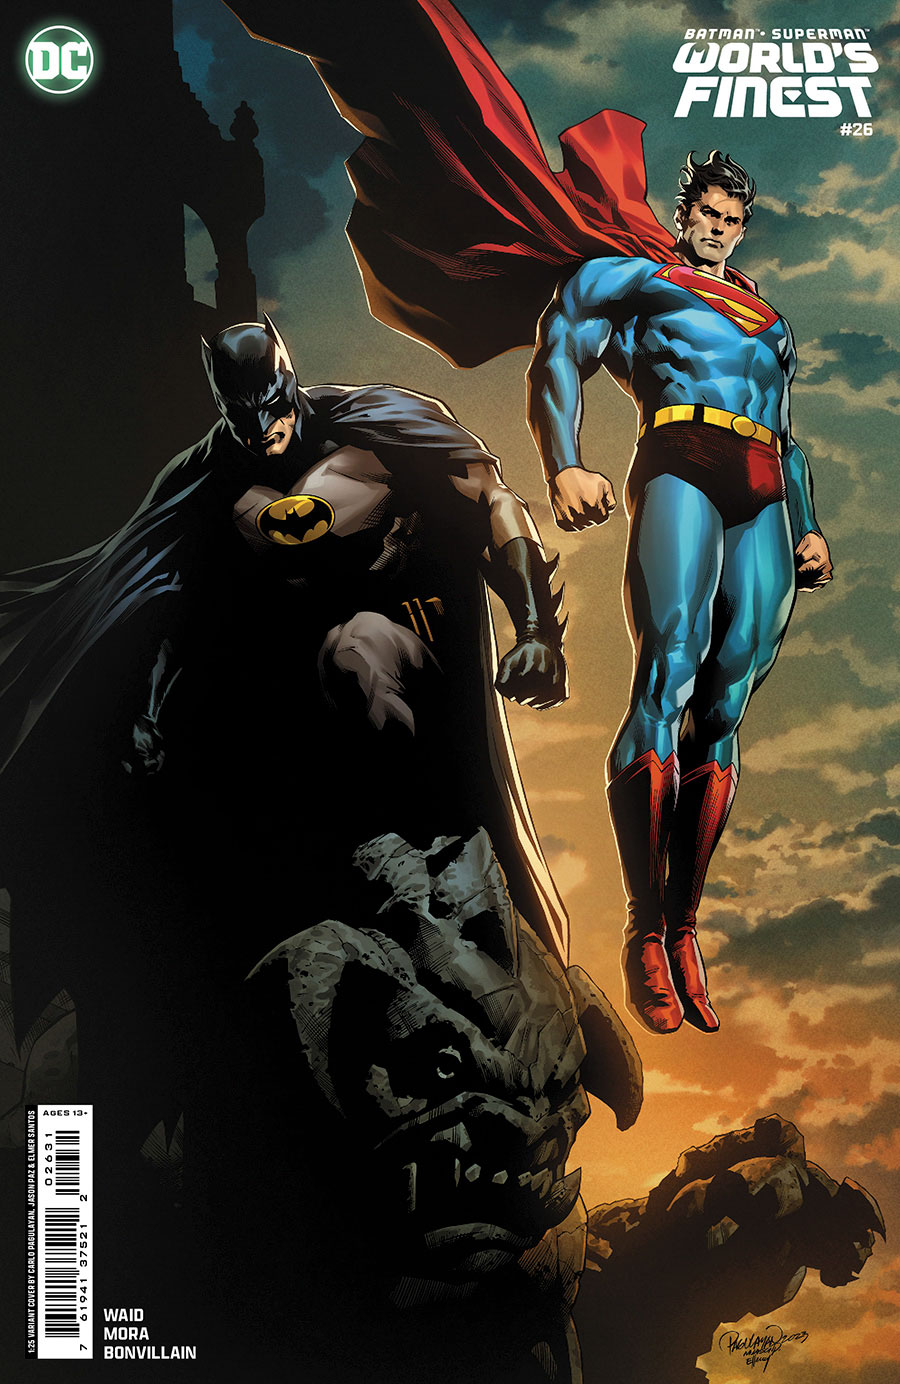 Batman Superman Worlds Finest #26 Cover F Incentive Carlo Pagulayan & Jason Paz Card Stock Variant Cover